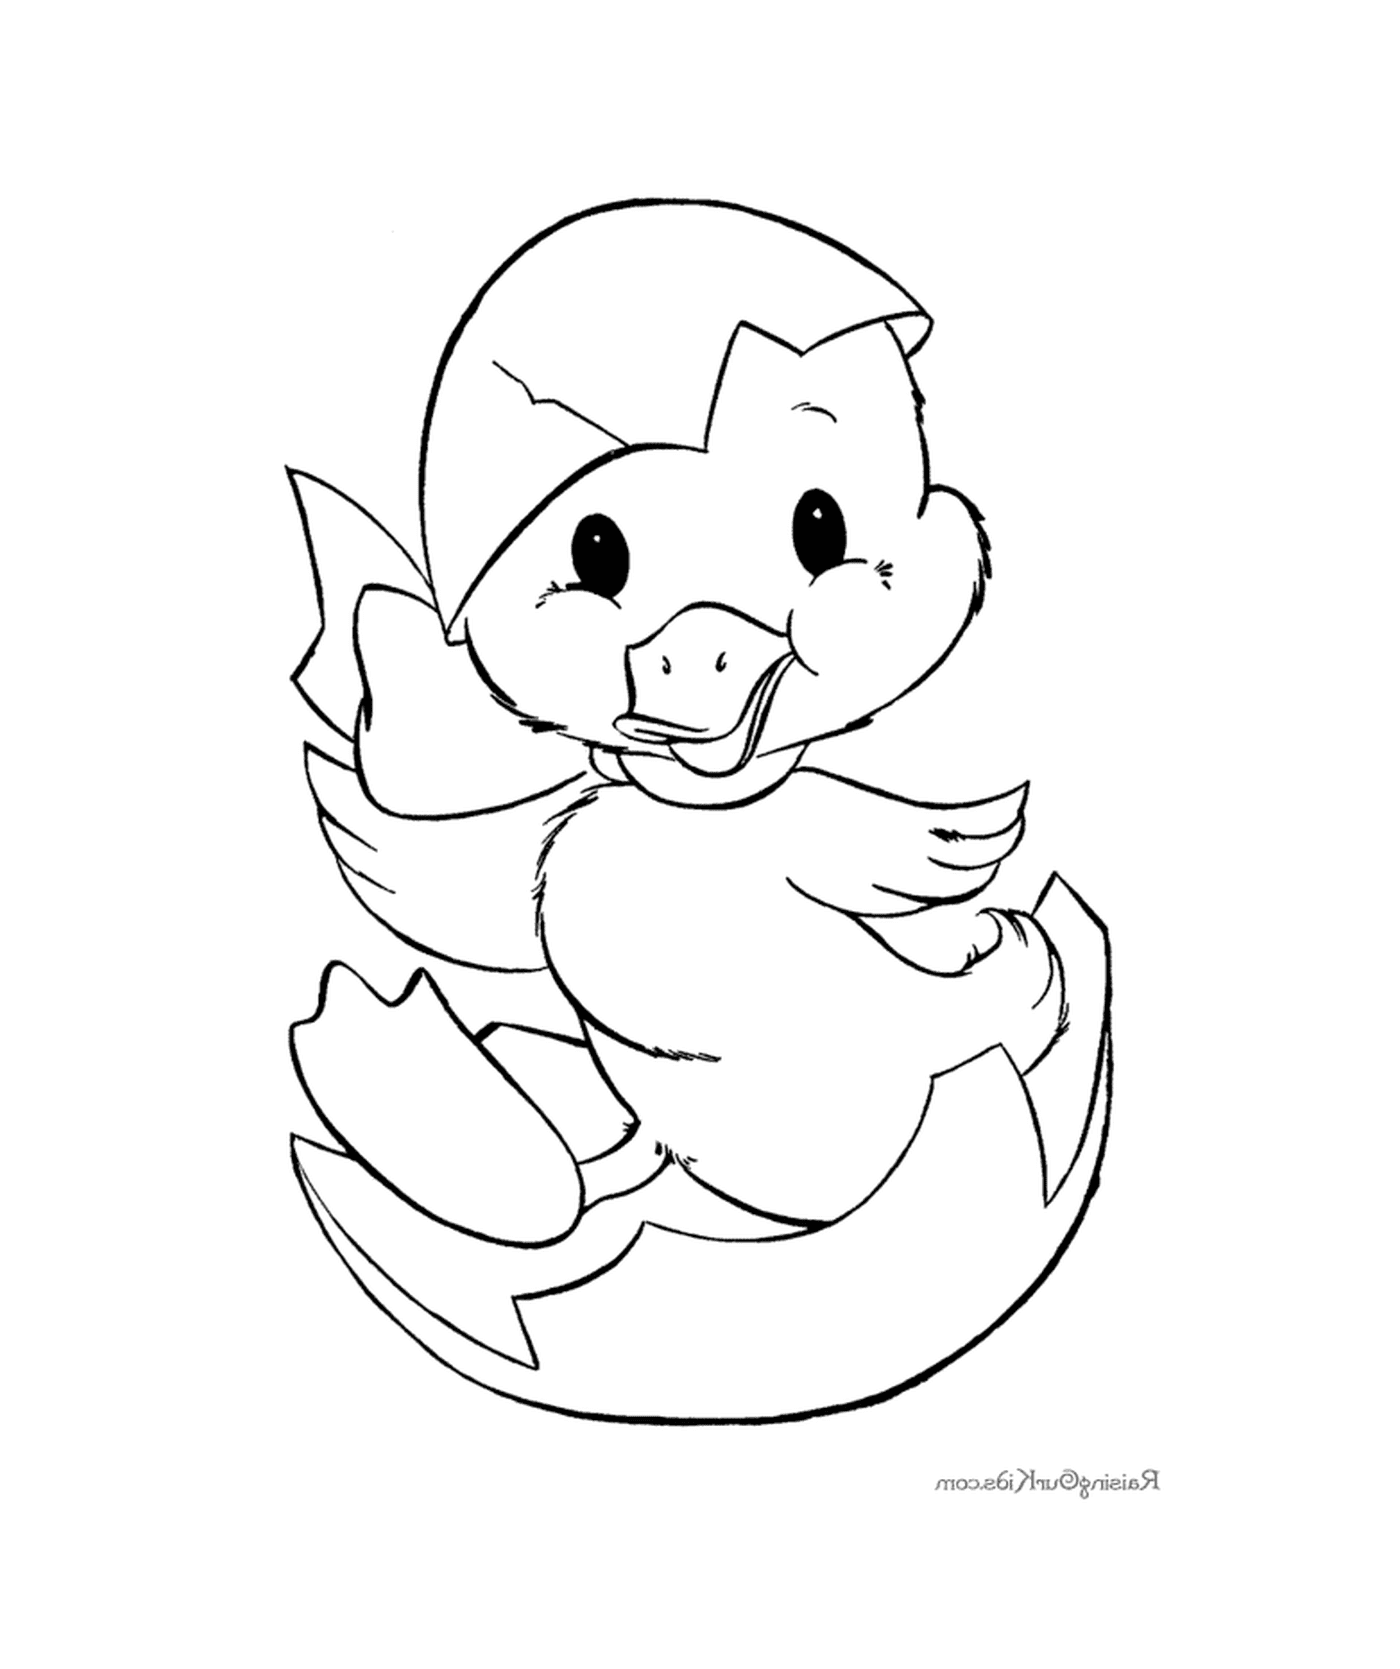  A duck baby 